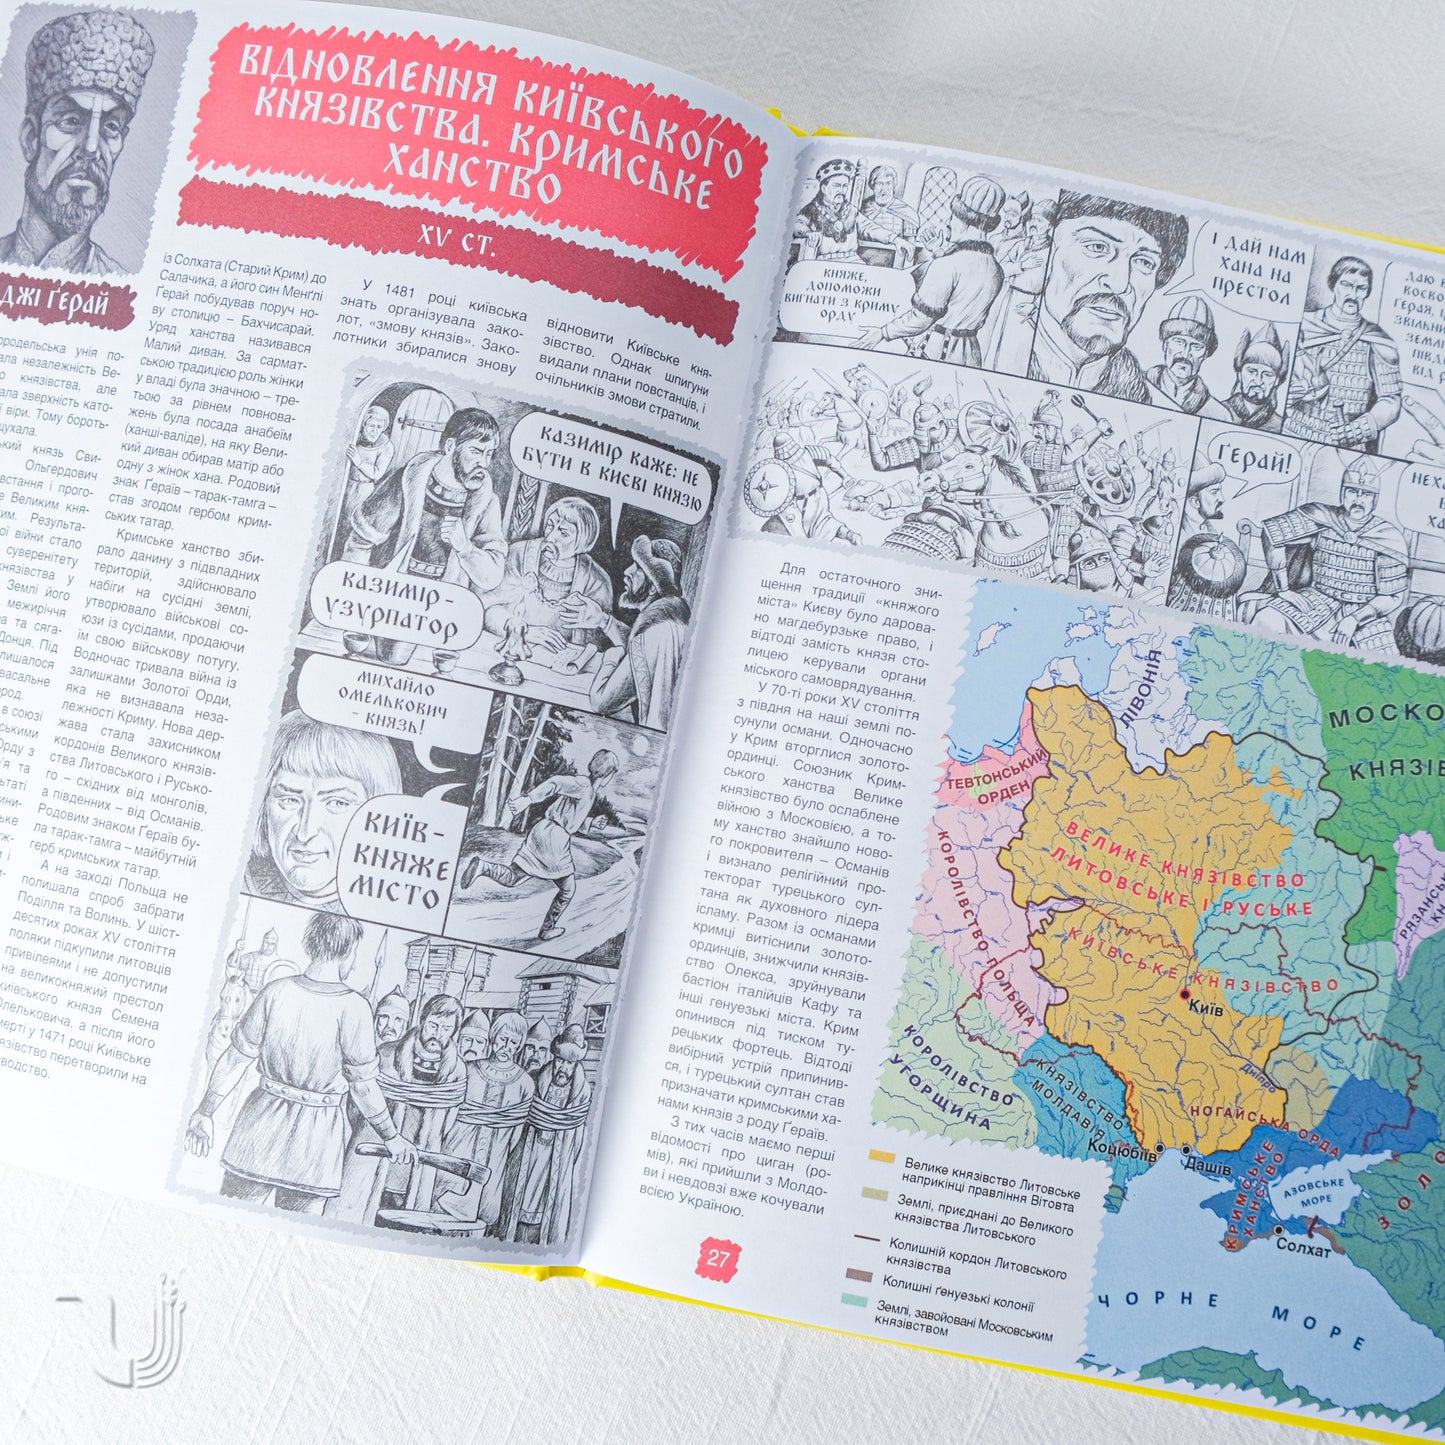 Illustrated history of the Independence of Ukraine